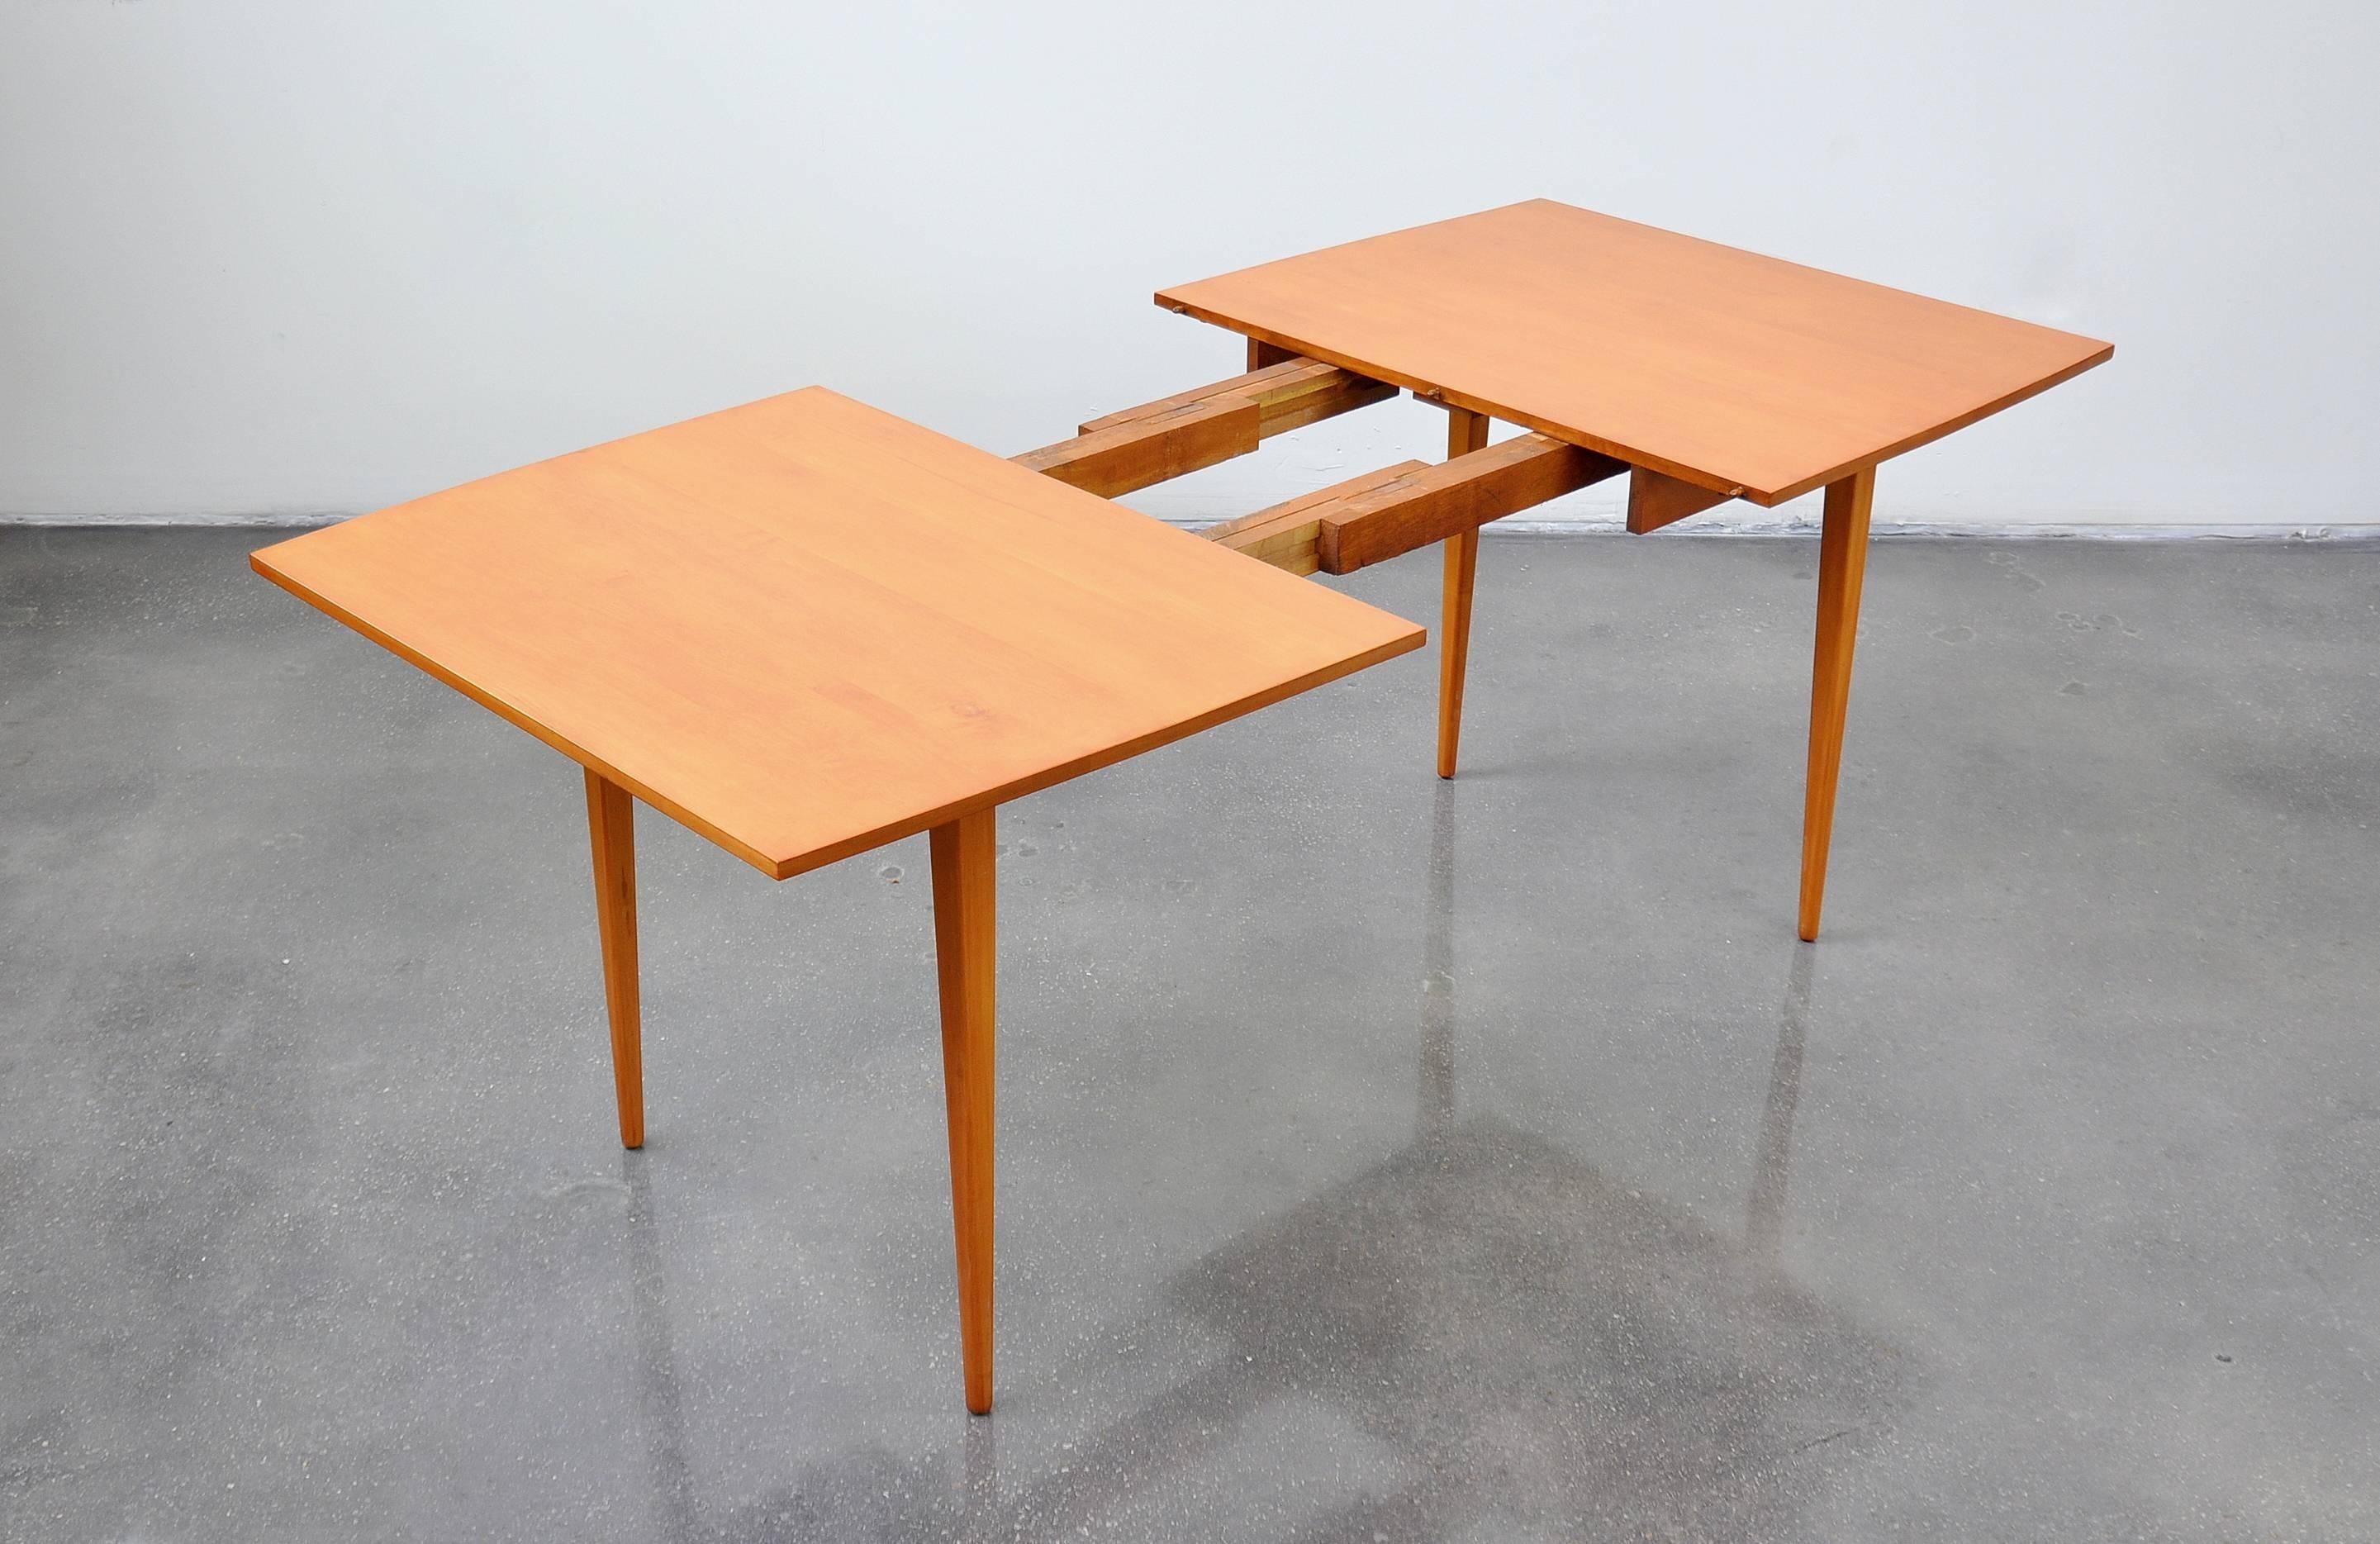 A beautiful Mid-Century Modern expandable dining table designed by Paul McCobb for the Perimeter Group line in circa 1957, and manufactured by Winchendon Furniture. The table is maple, with a boat-shaped top and elegant, simple, timeless lines. It